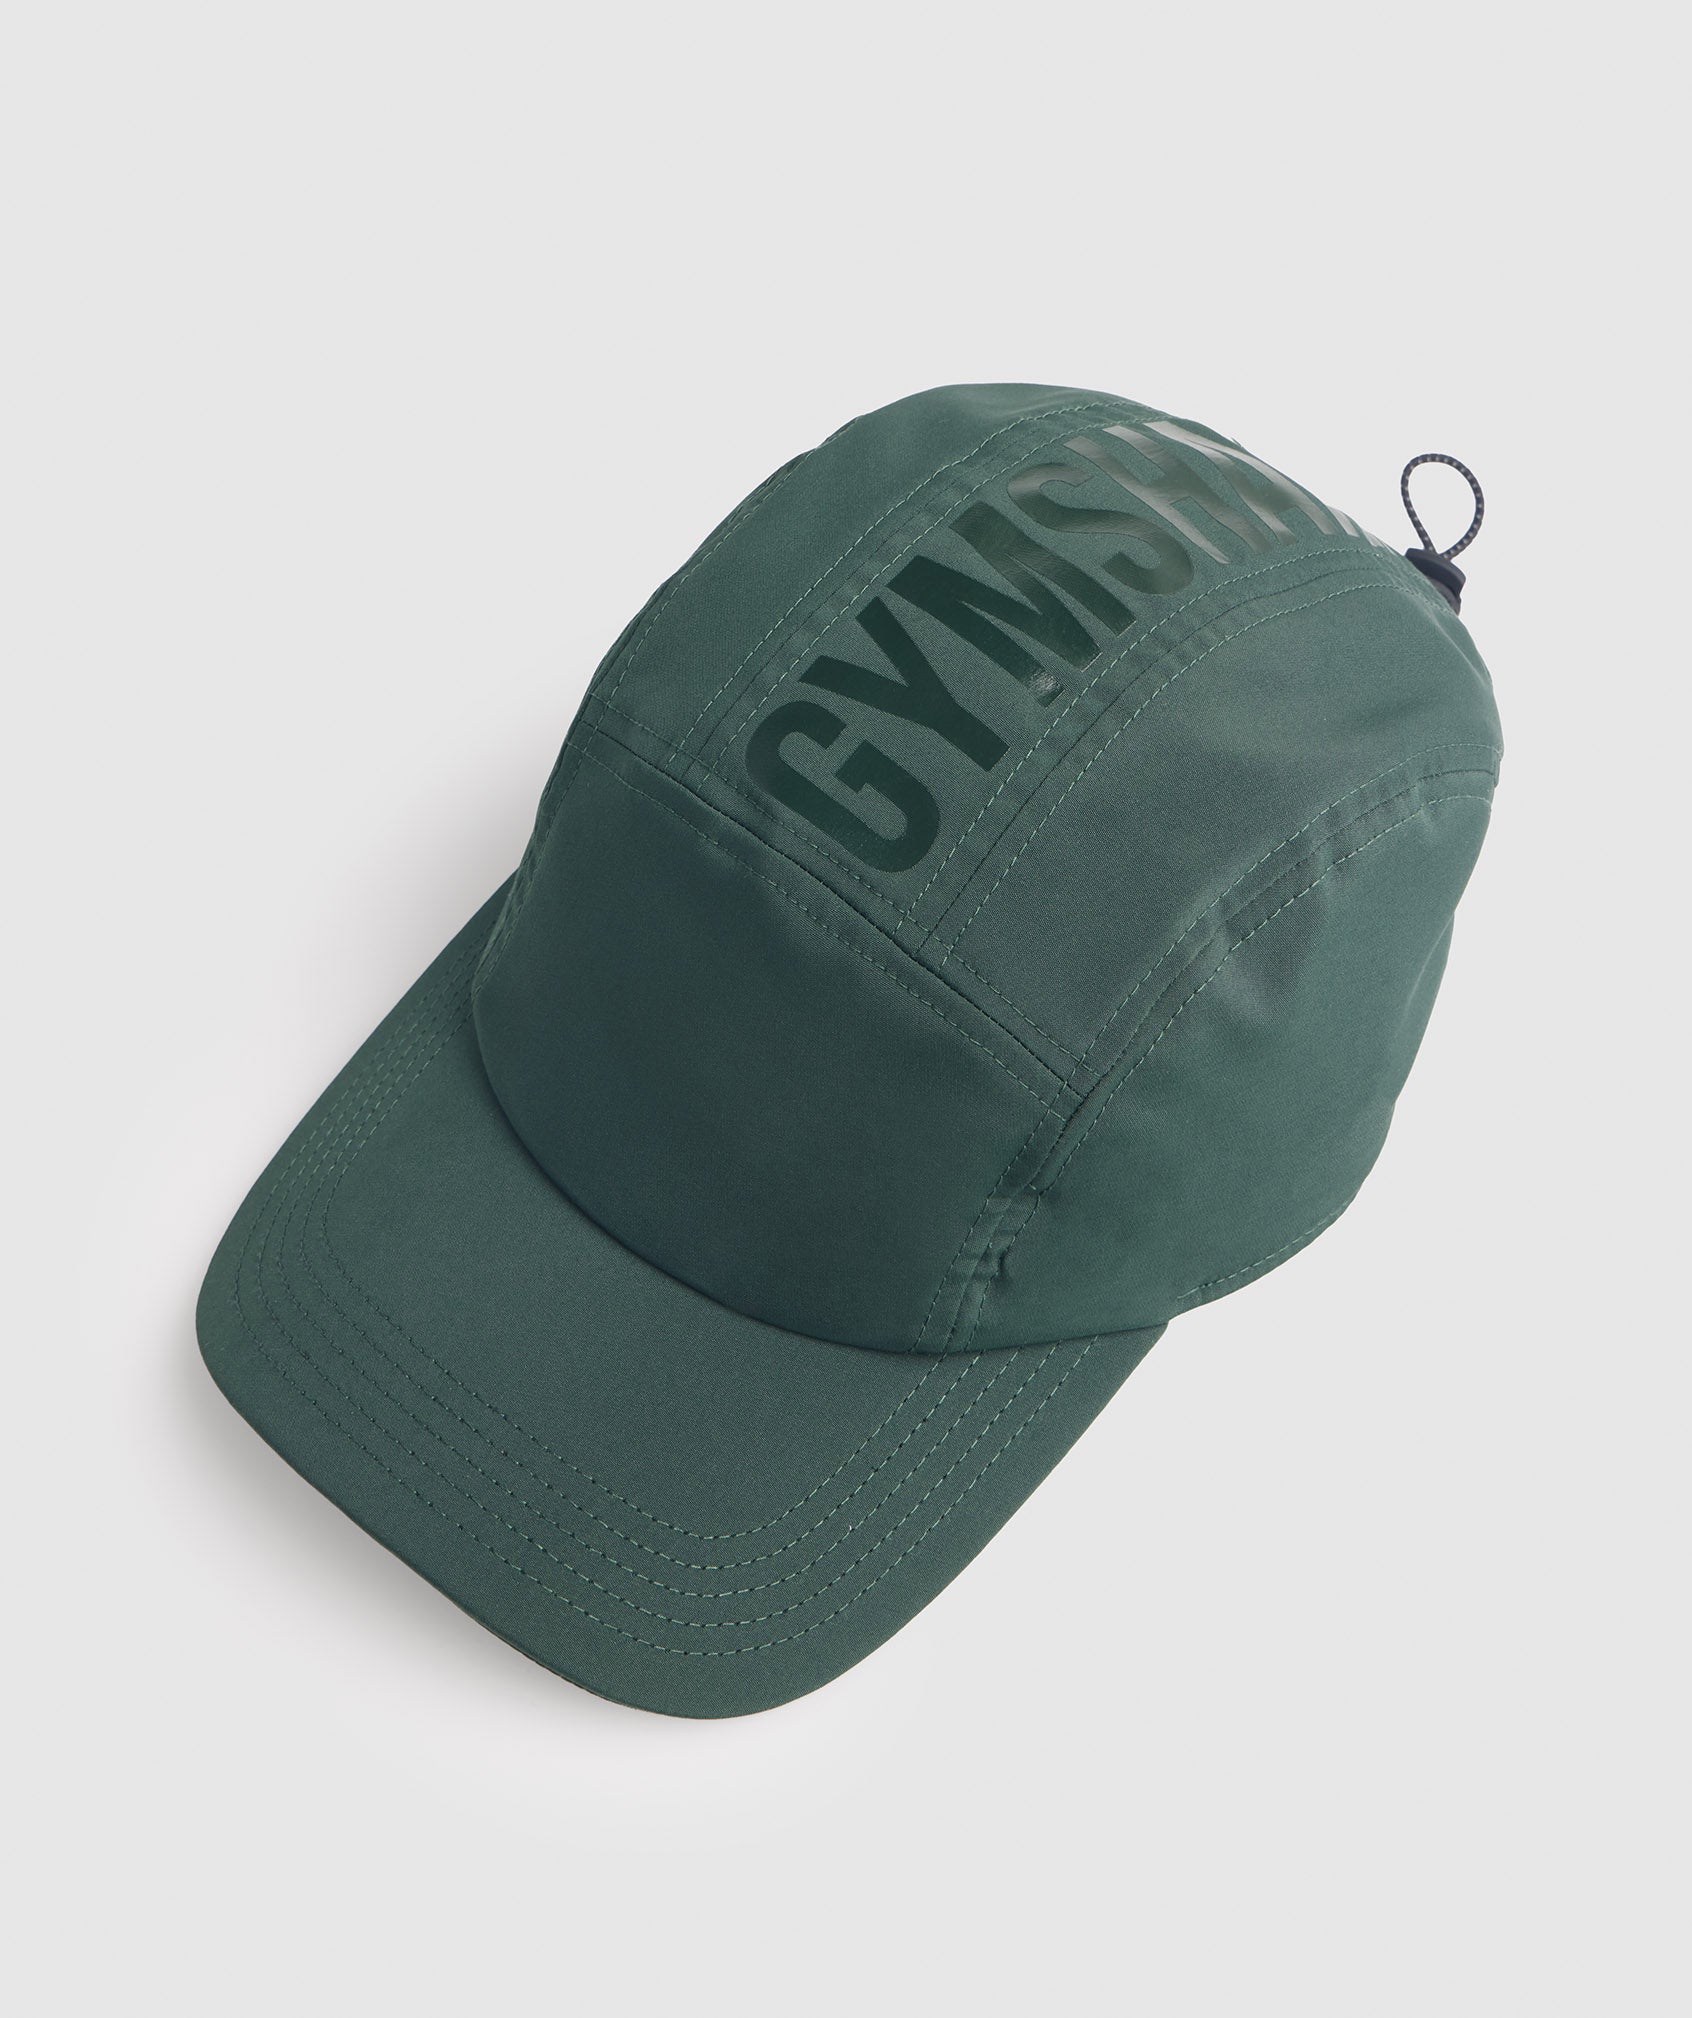  5 Panel Running Cap in Obsidian Green - view 9